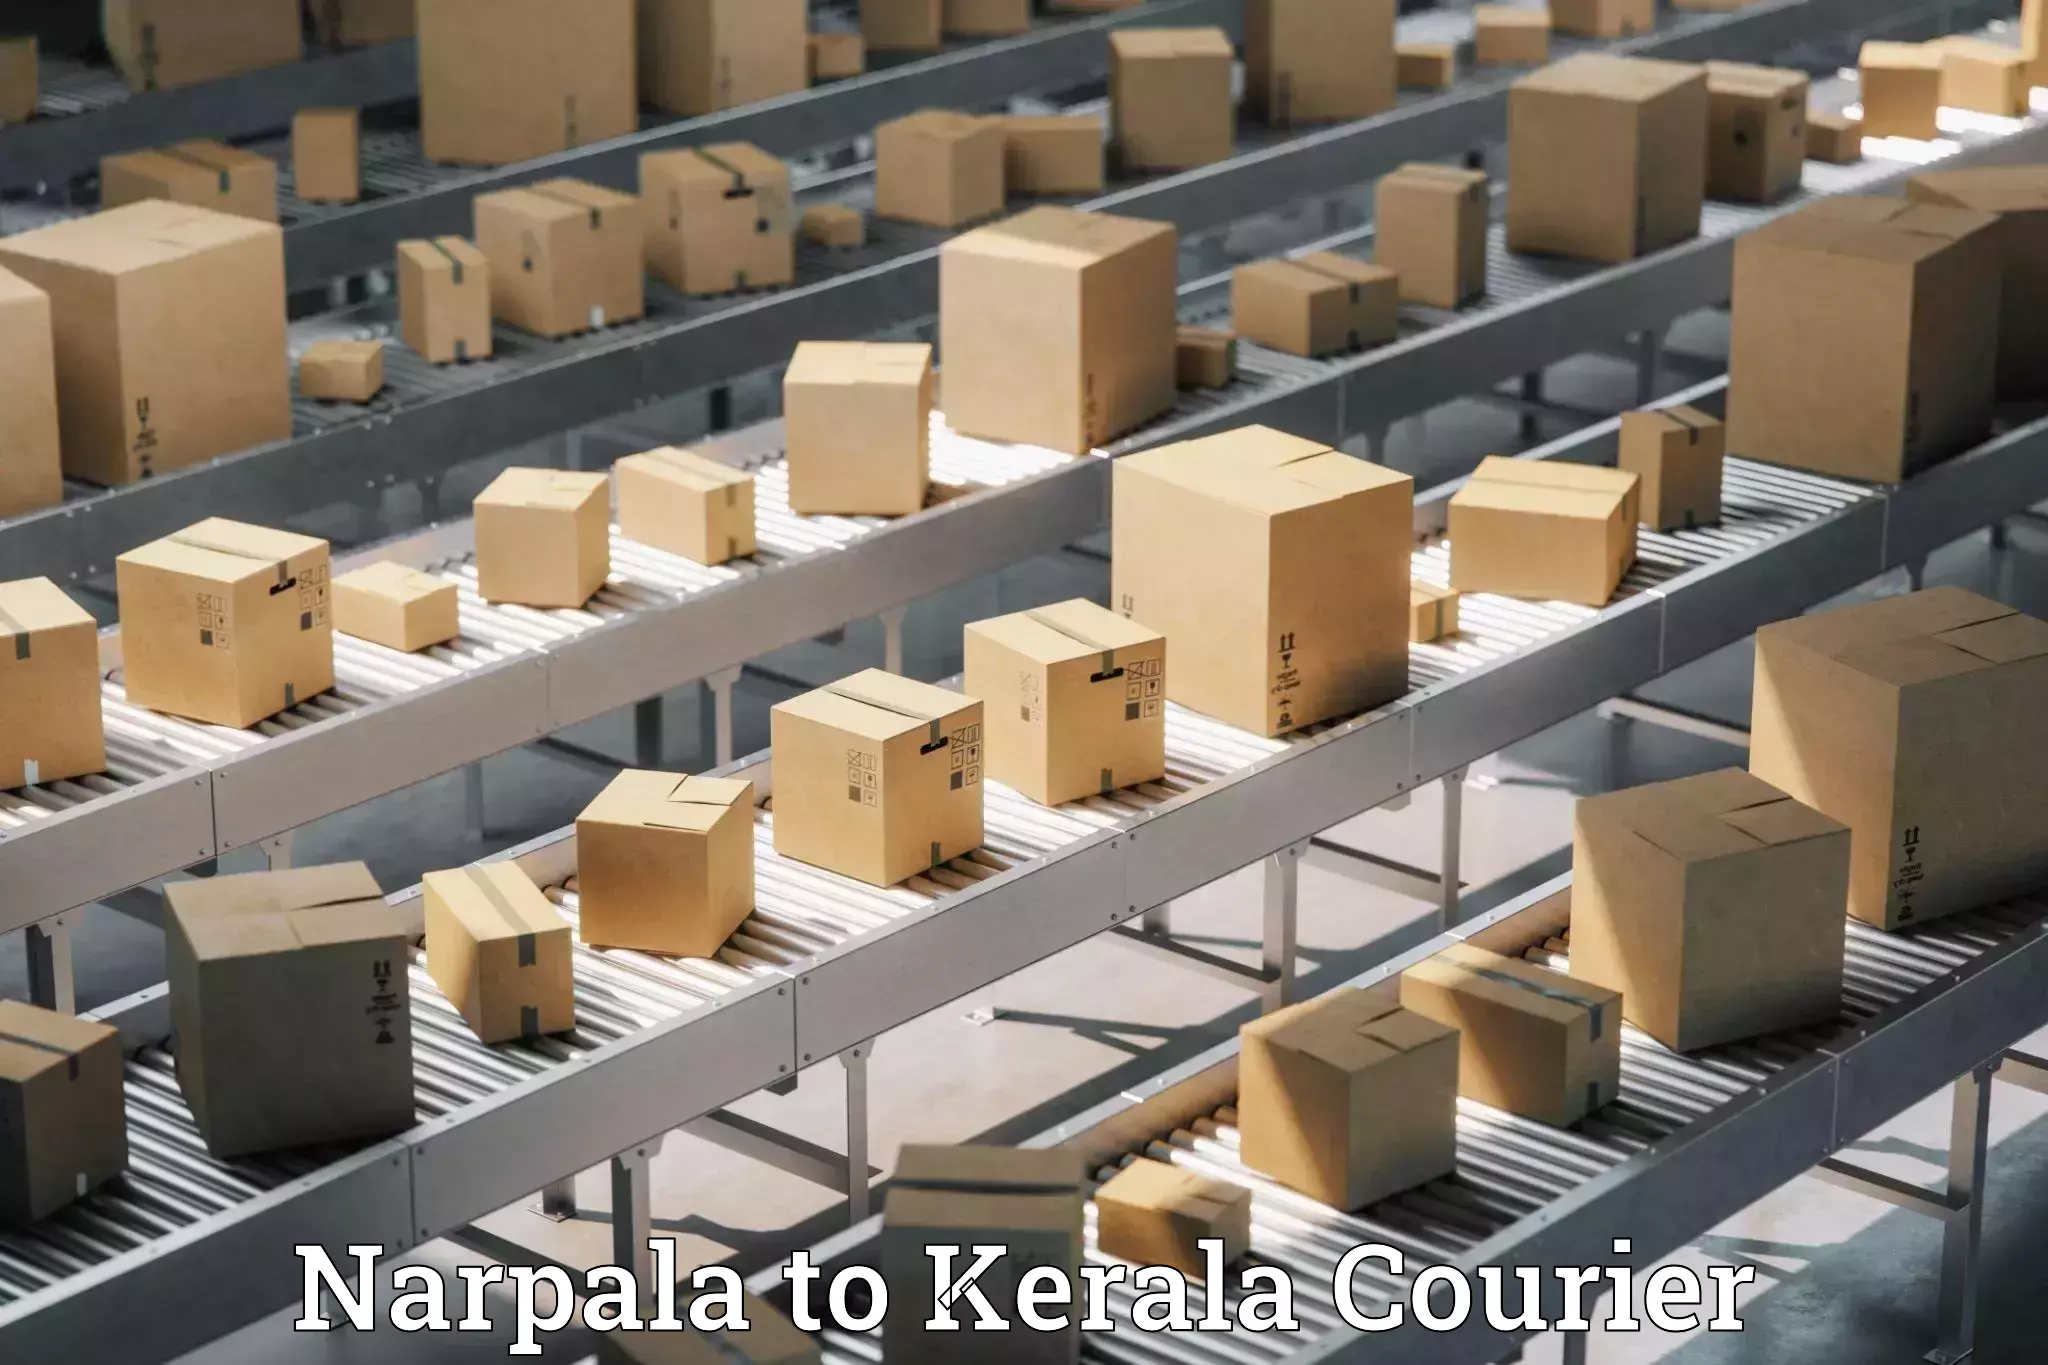 Courier service comparison Narpala to Kilimanoor